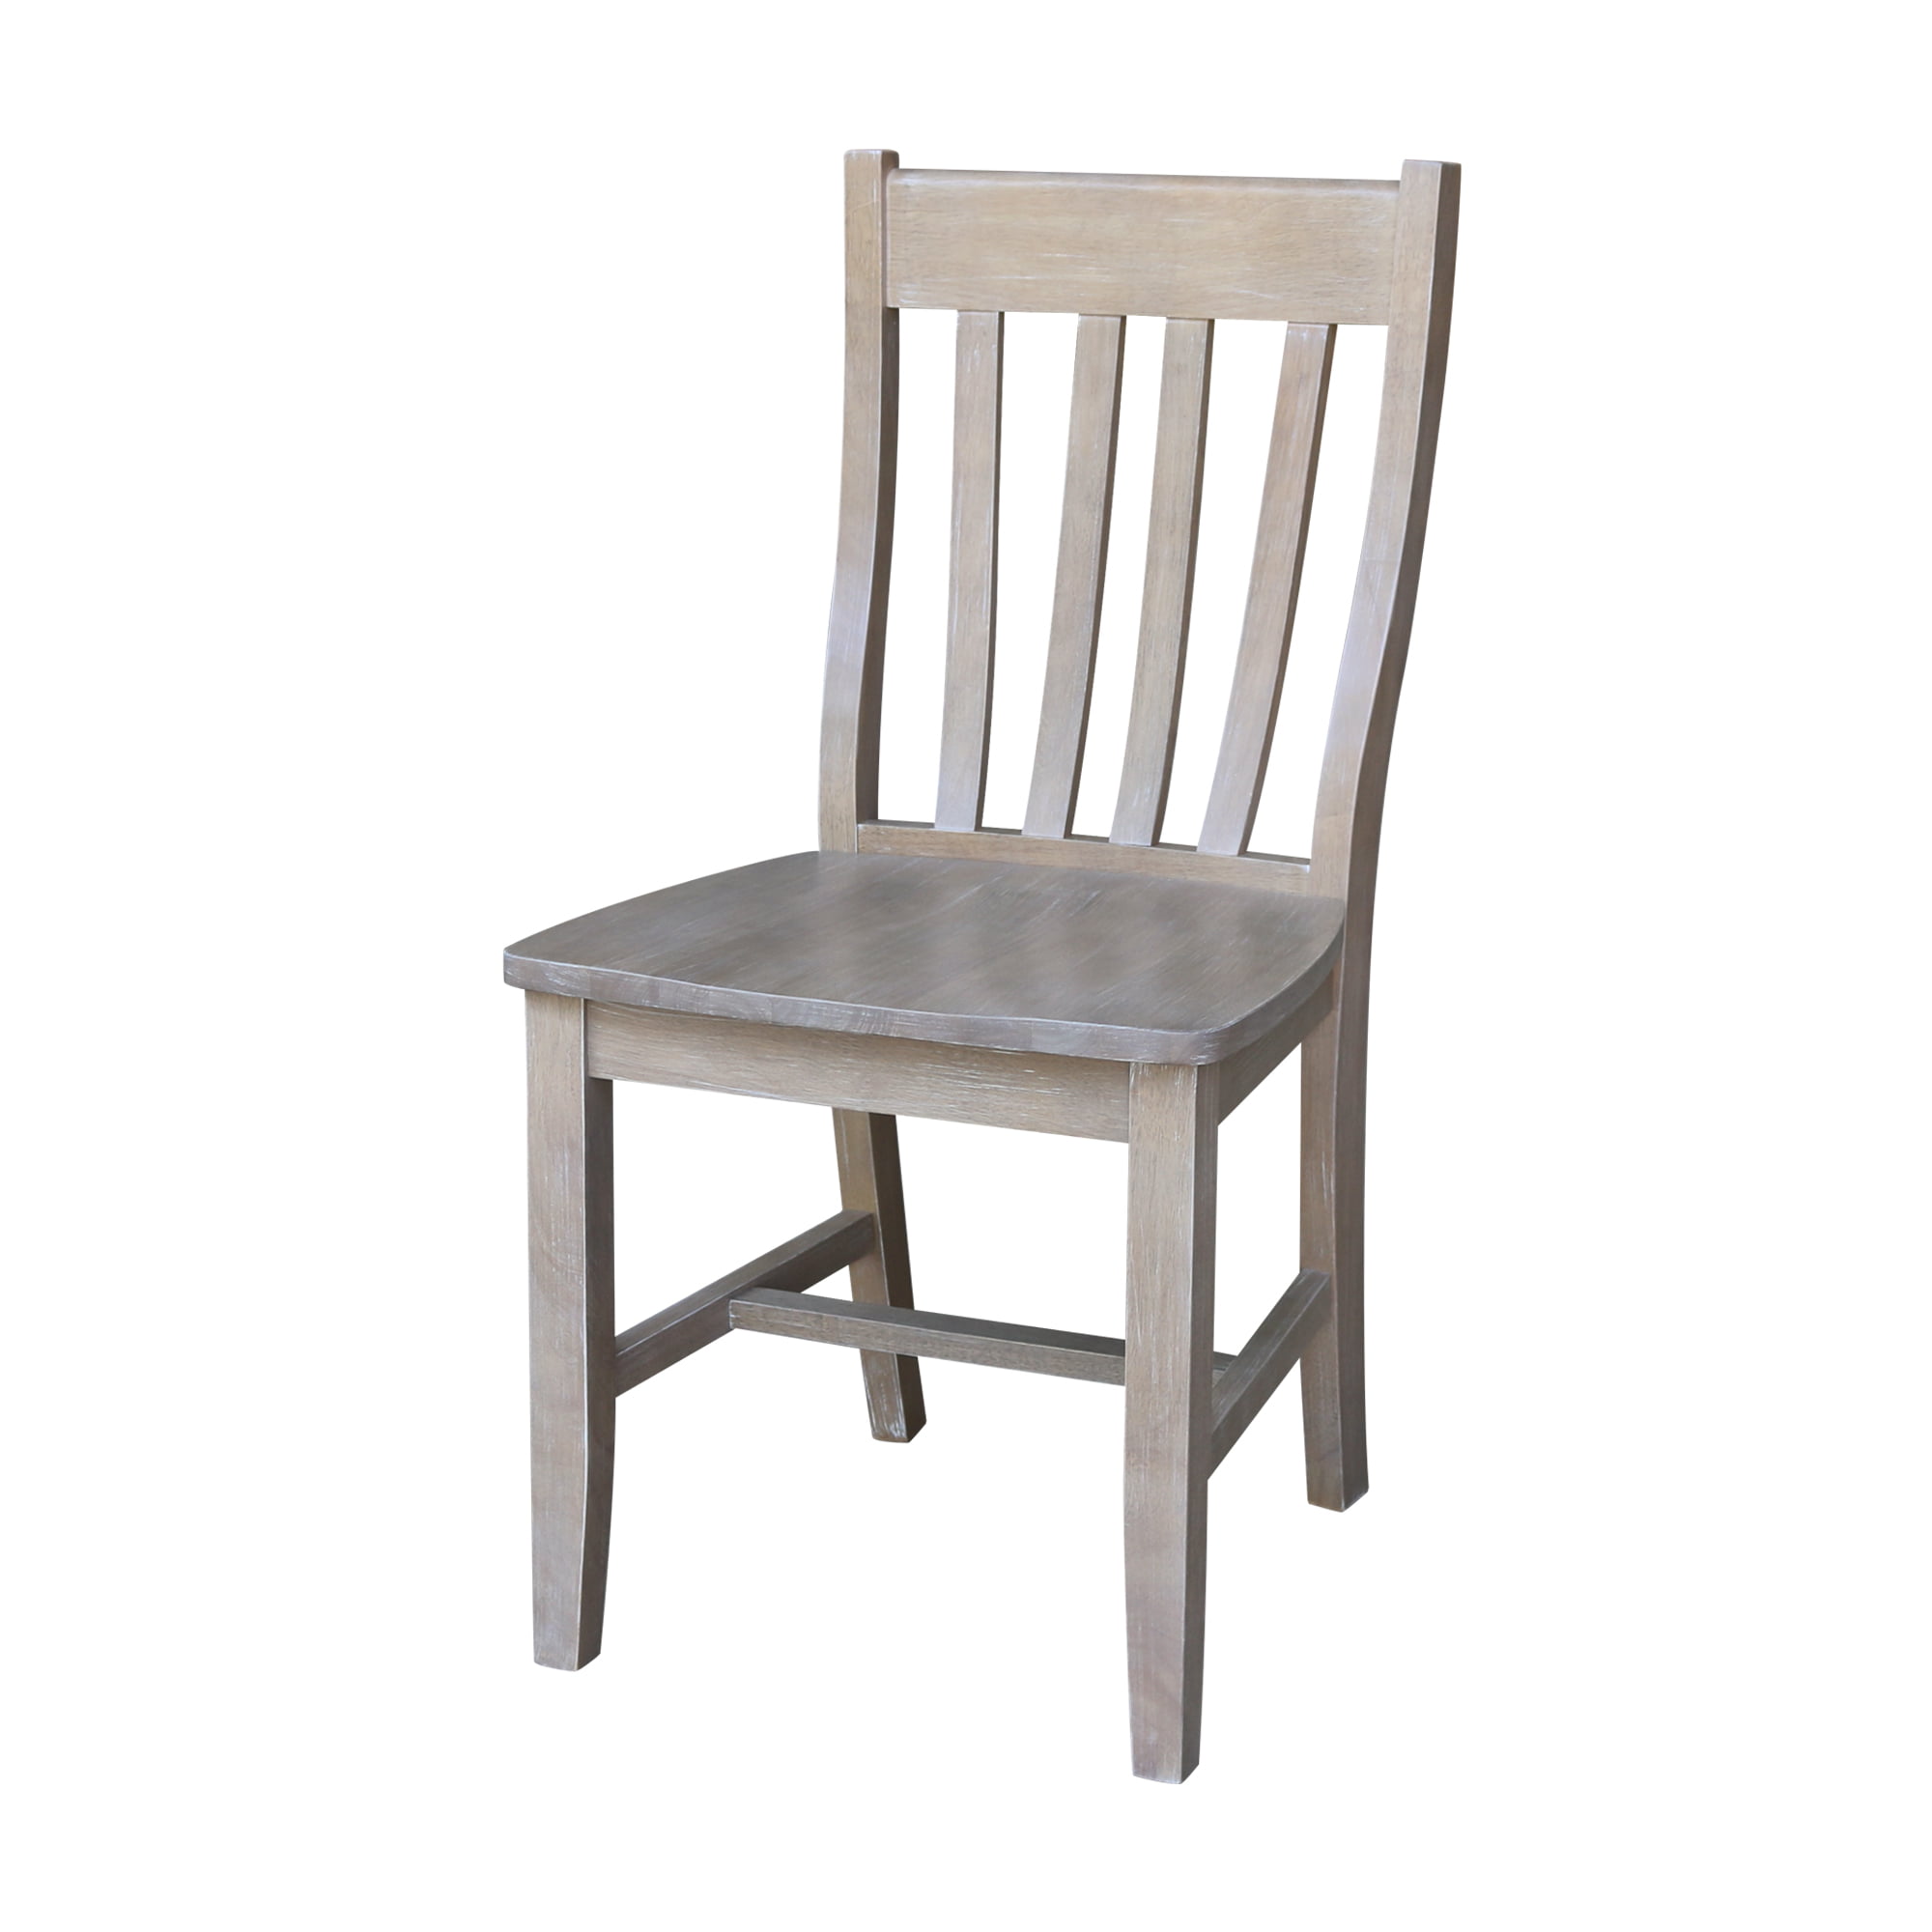 Cafe Dining Chair In Washed Gray Taupe, Grey Wash Wood Dining Chairs